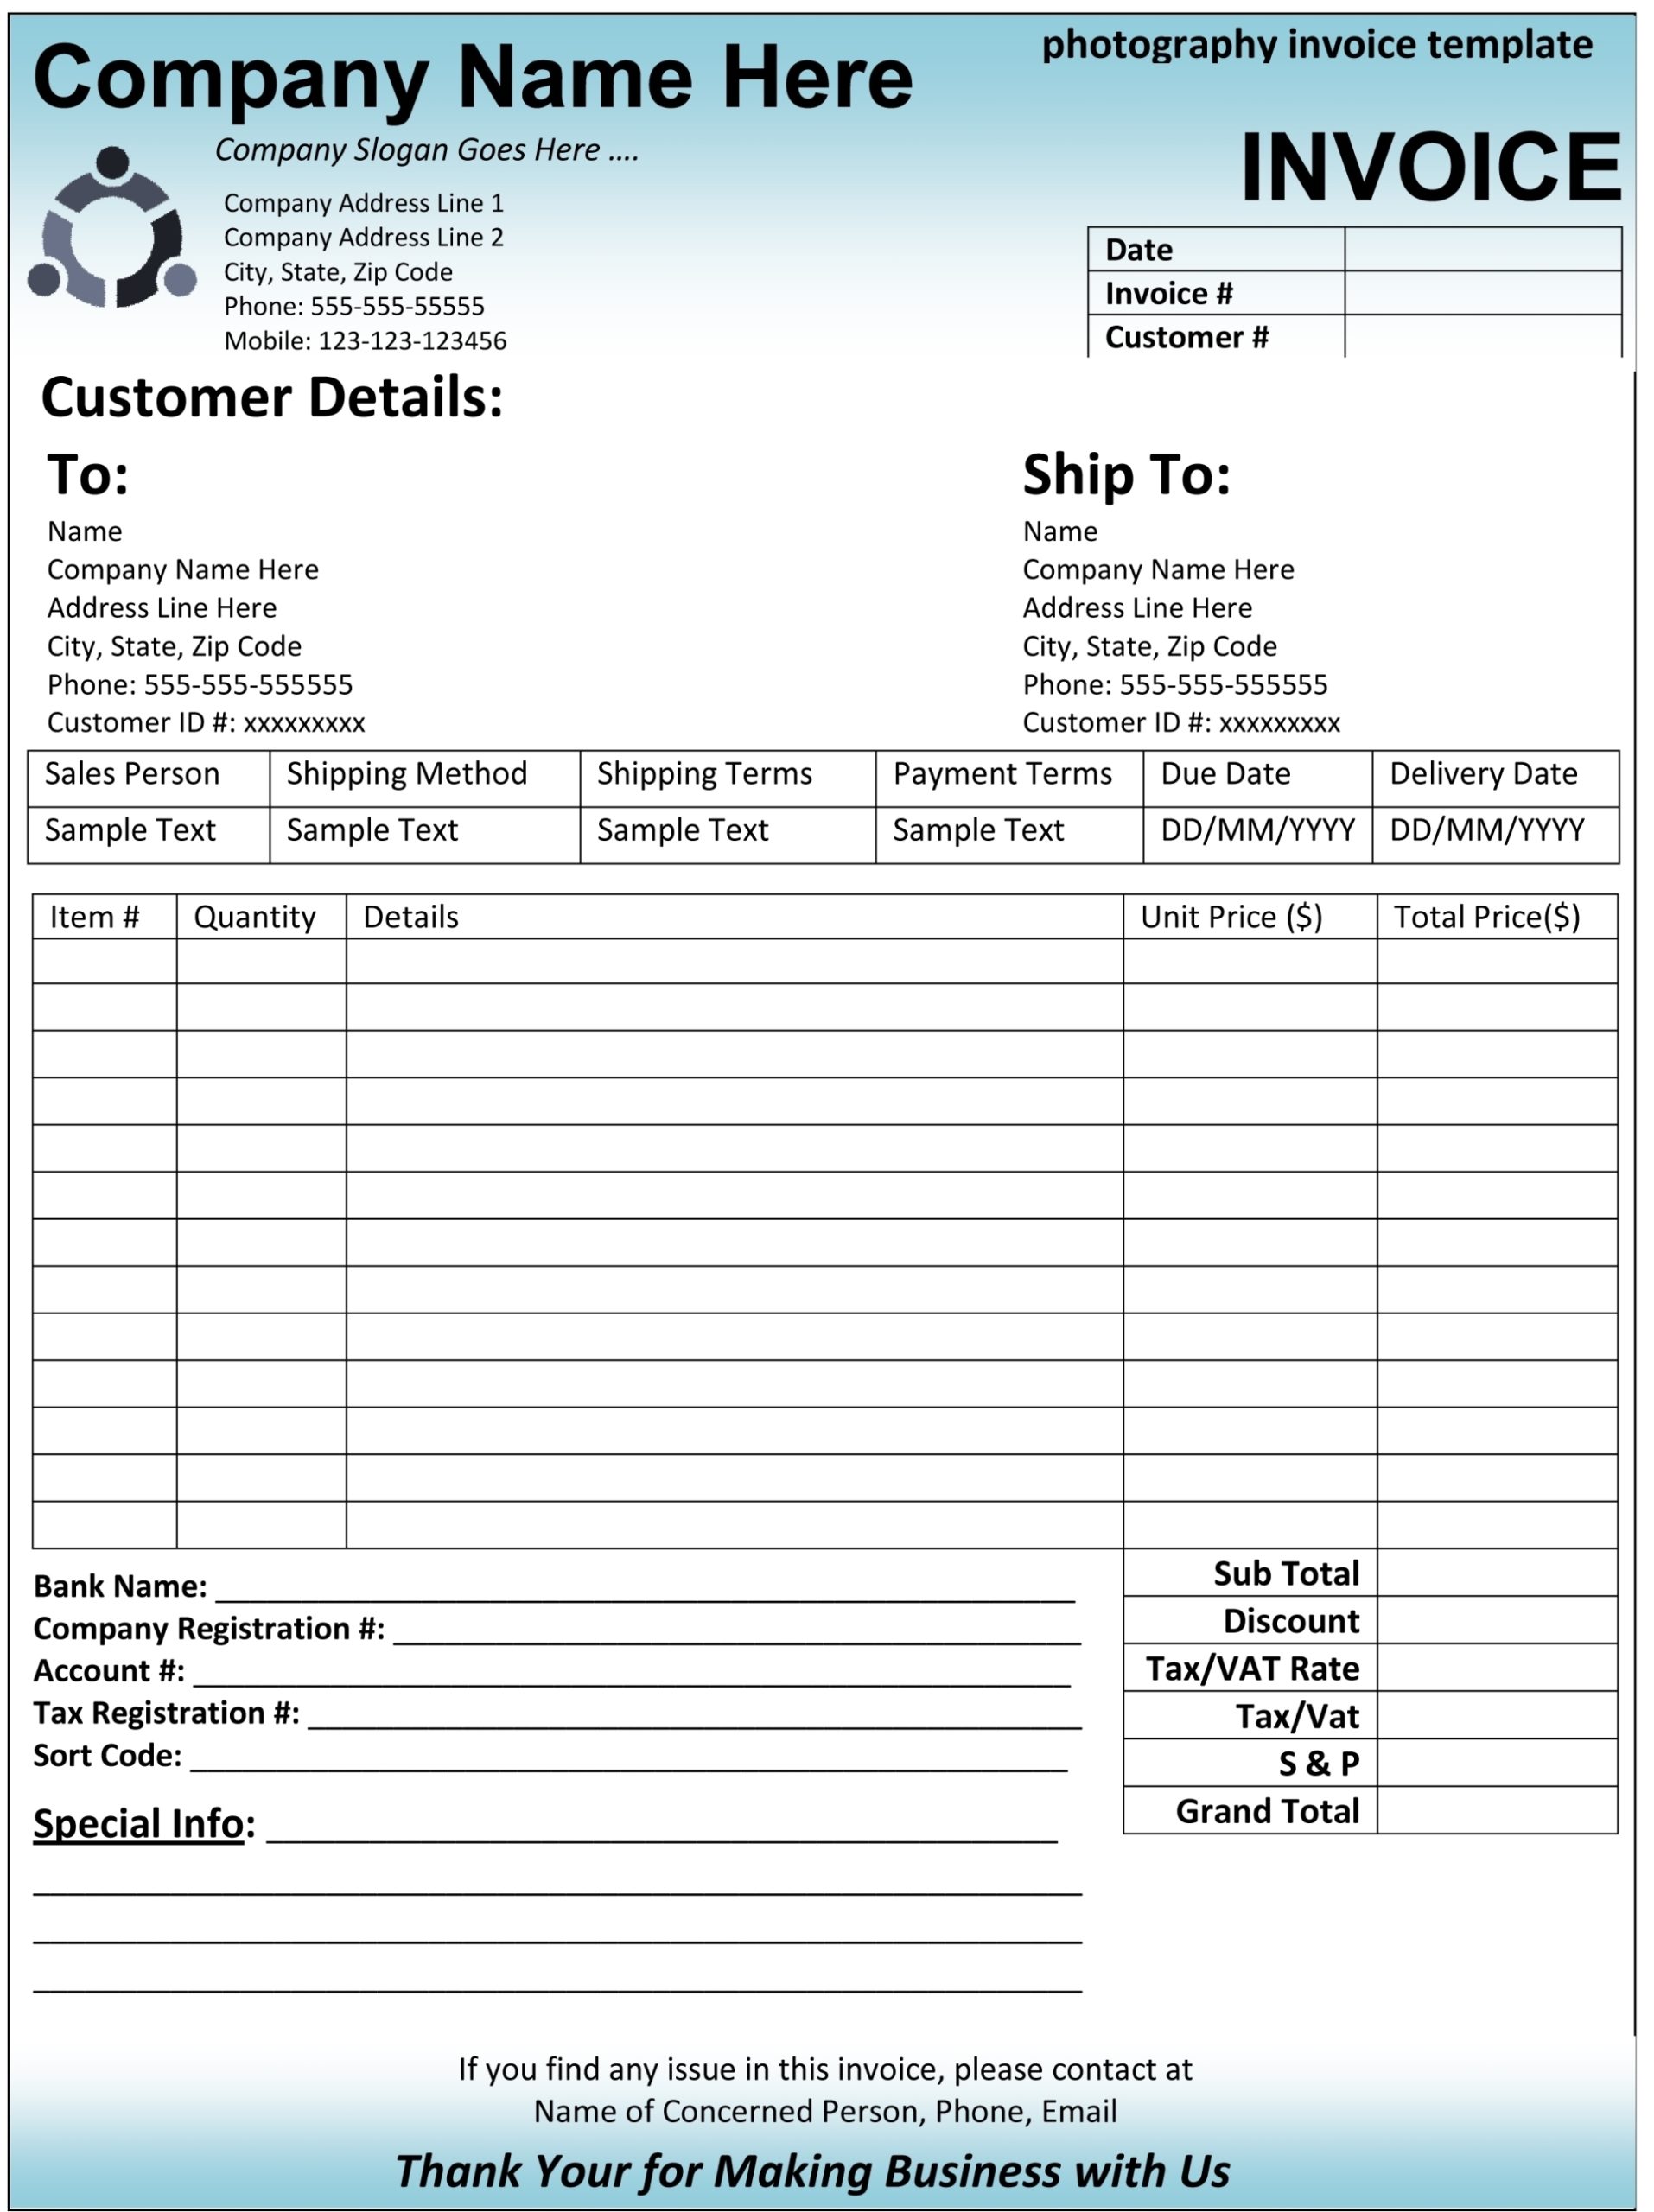 Best Invoice Template * Invoice Template Ideas Within Invoice For Work Done Template